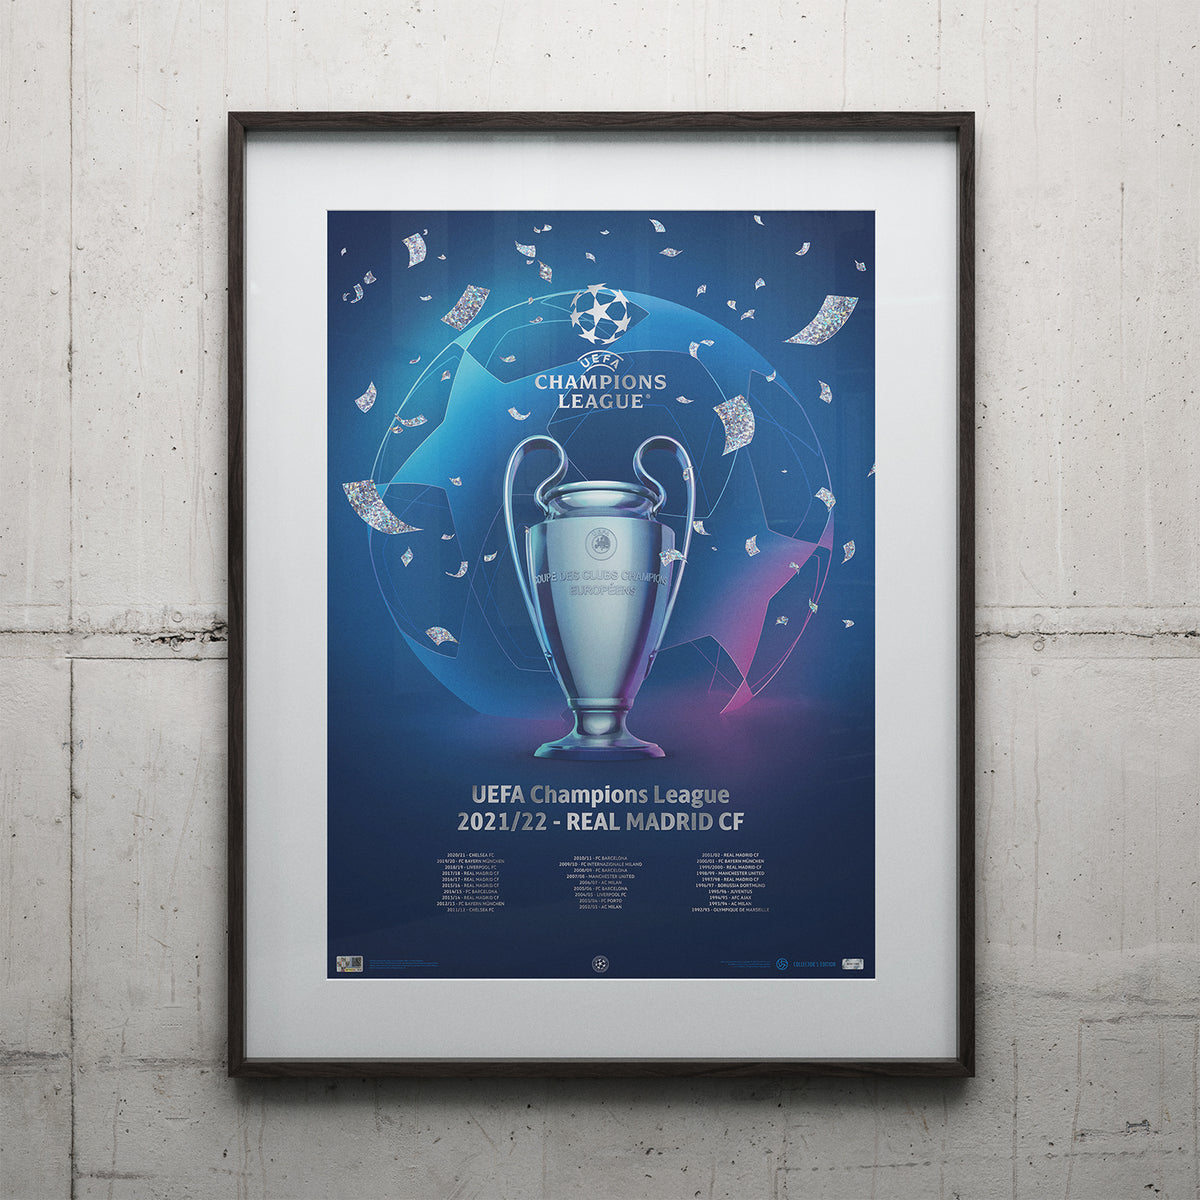 UEFA Champions League - Iconic Trophy Poster - Real Madrid CF - 2021/22 | Collector’s Edition UEFA Club Competitions Online Store